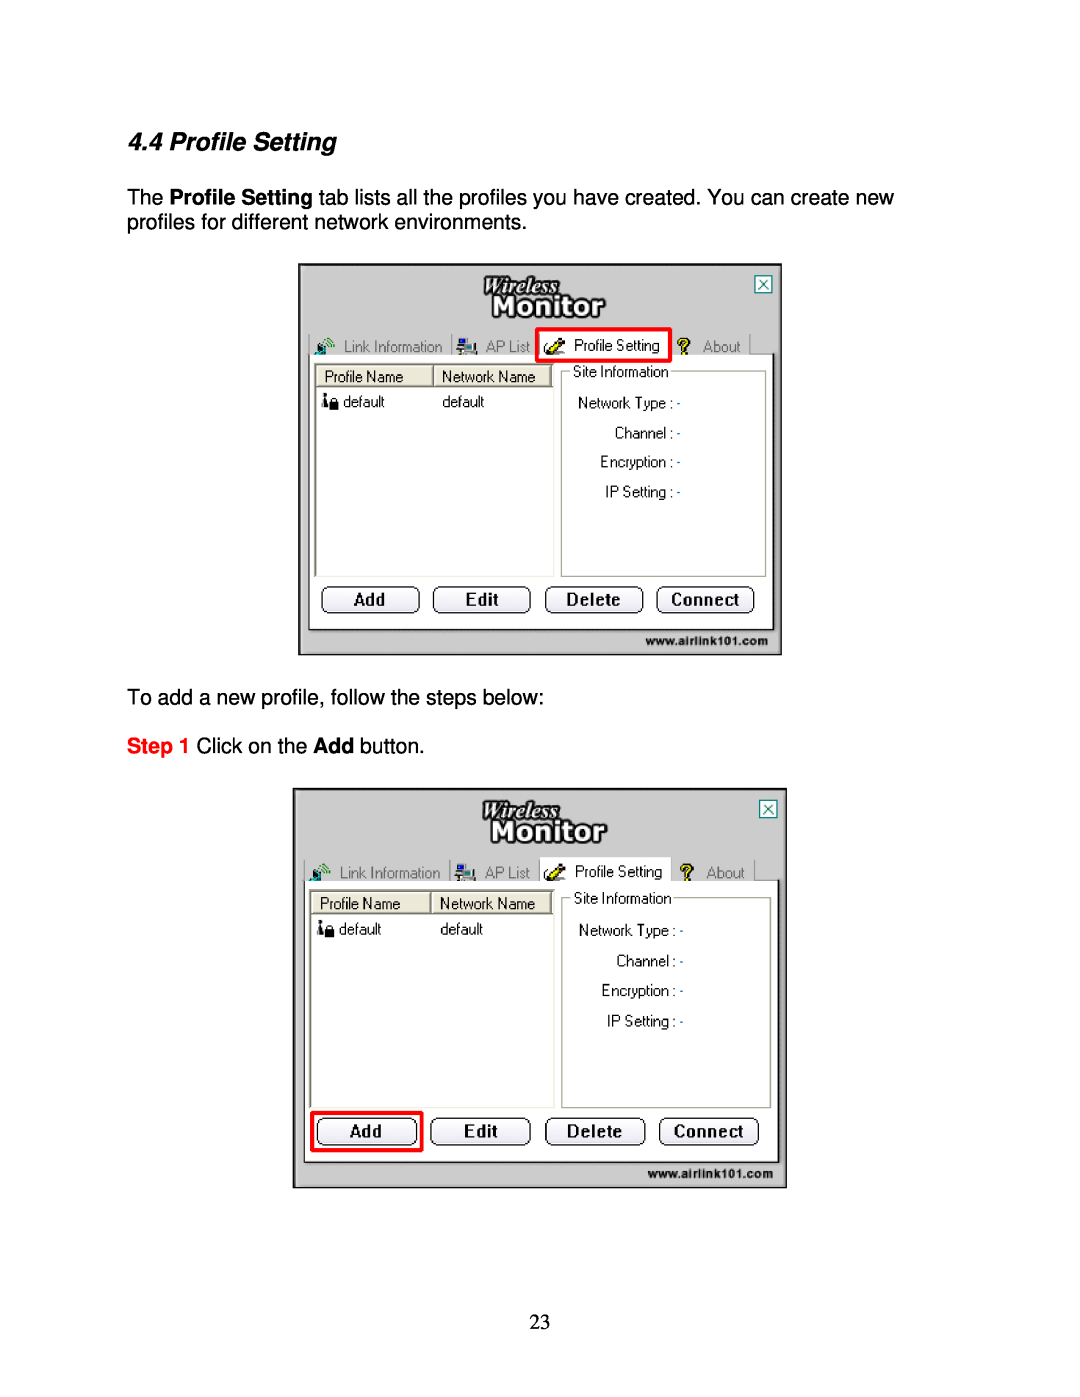 Airlink101 AWLH5026 user manual Profile Setting, To add a new profile, follow the steps below, Click on the Add button 